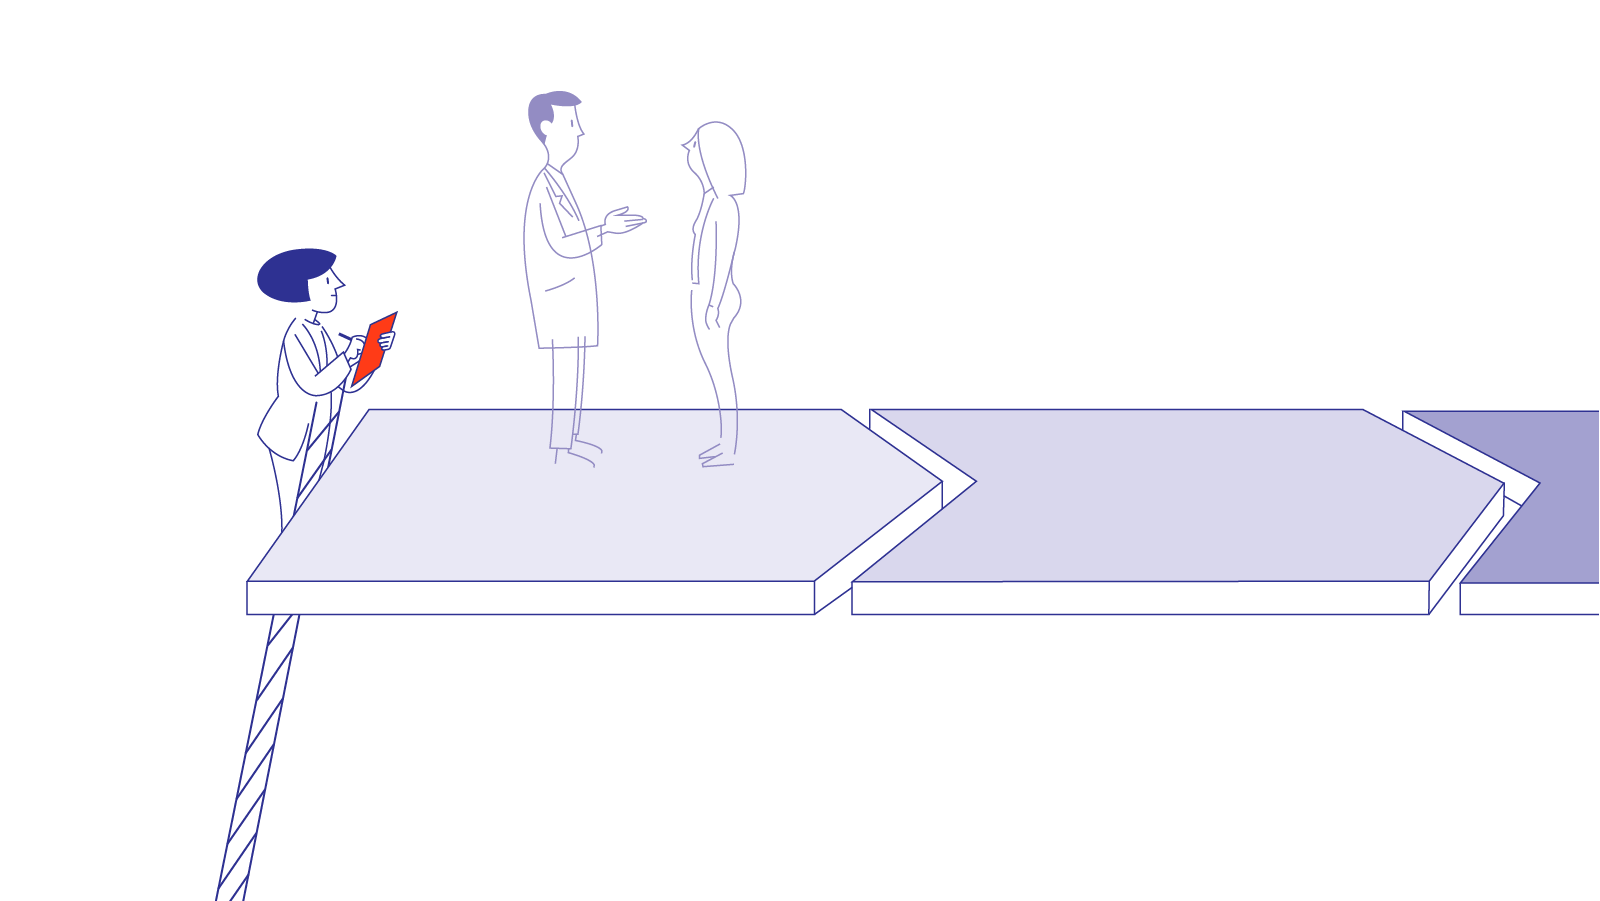 A depiction of a woman standing on a ladder with a clipboard taking notes as she observes a doctor and a patient having a conversation. The doctor and patient are standing on an arrow-shaped platform showing process movement.